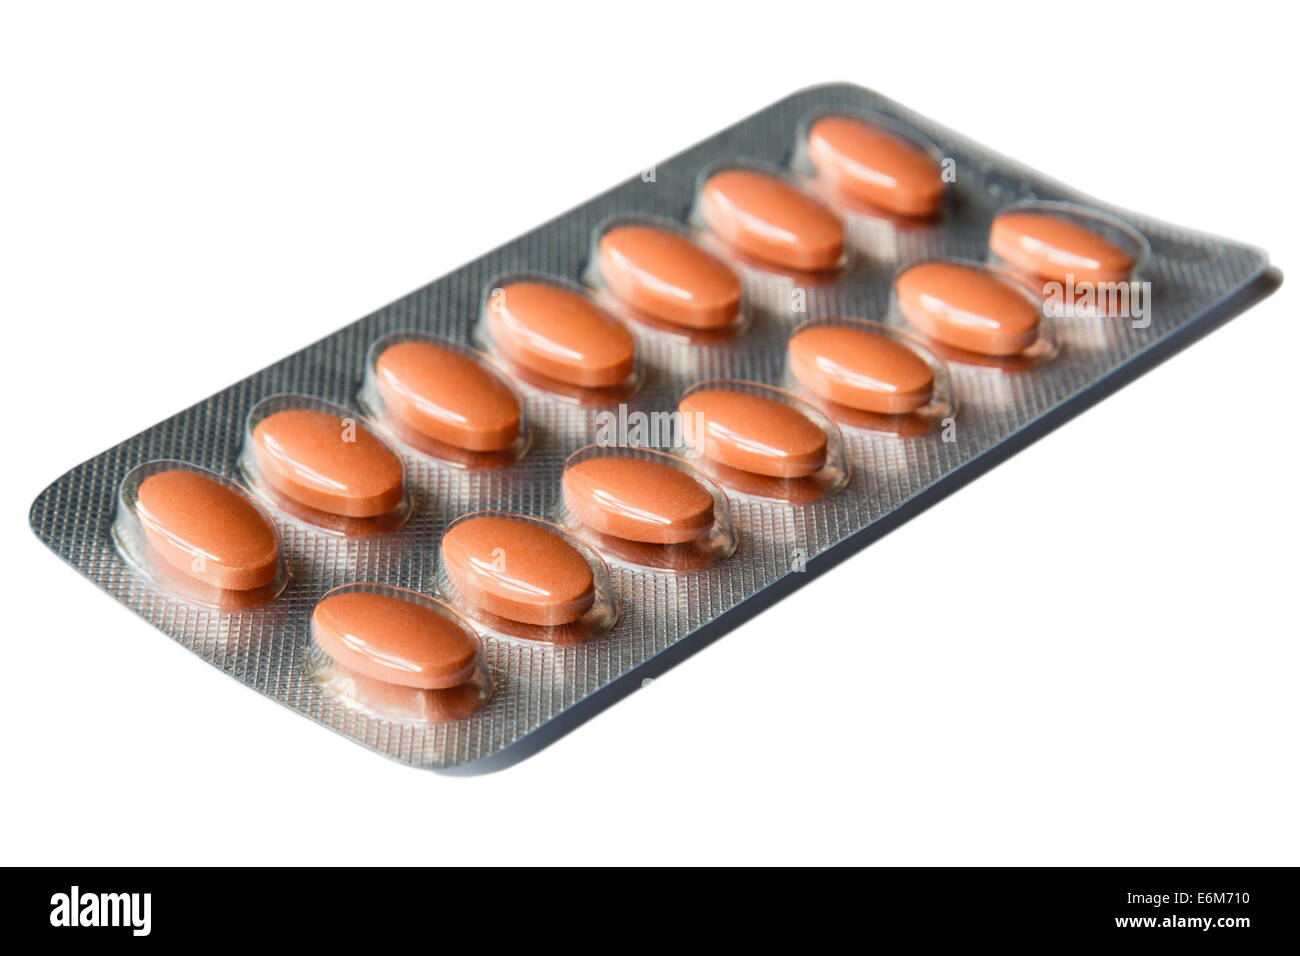 Simvastatin 40 mg statin tablets for treating high cholesterol in a pills foil calendar blister pack on a white background Stock Photo